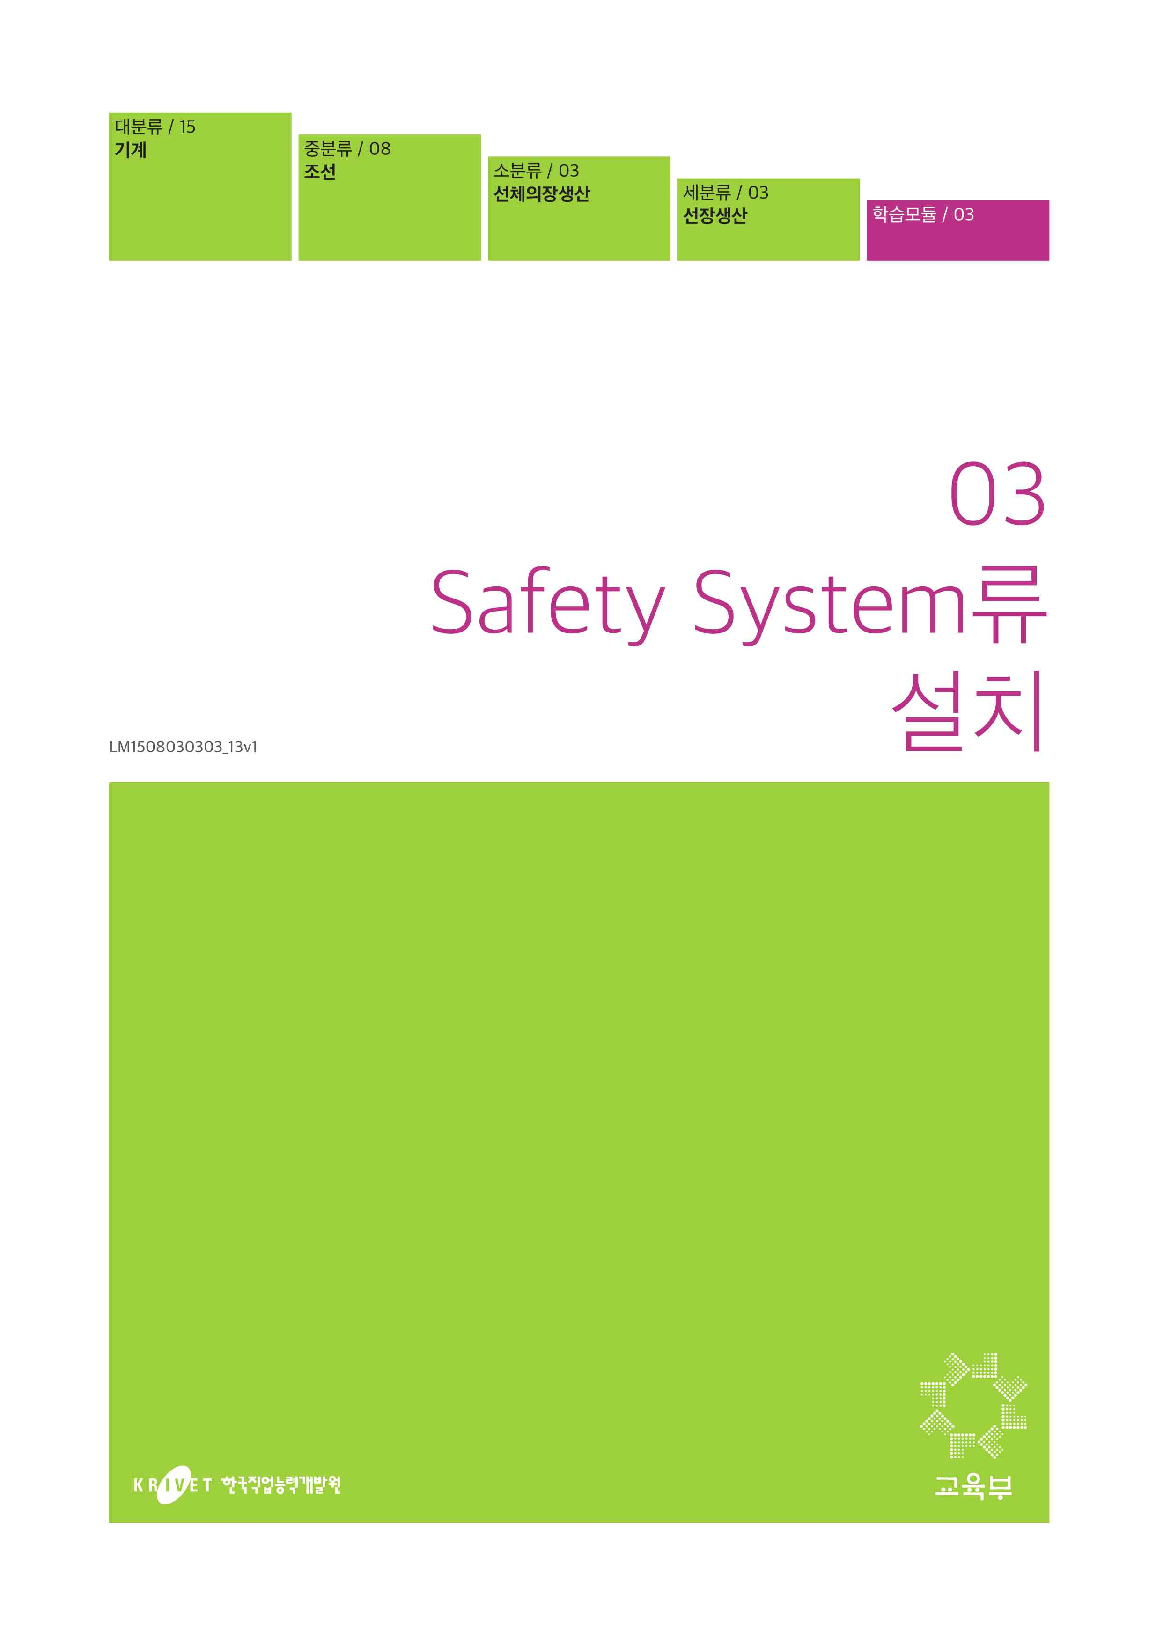 03. Safety System류 설치